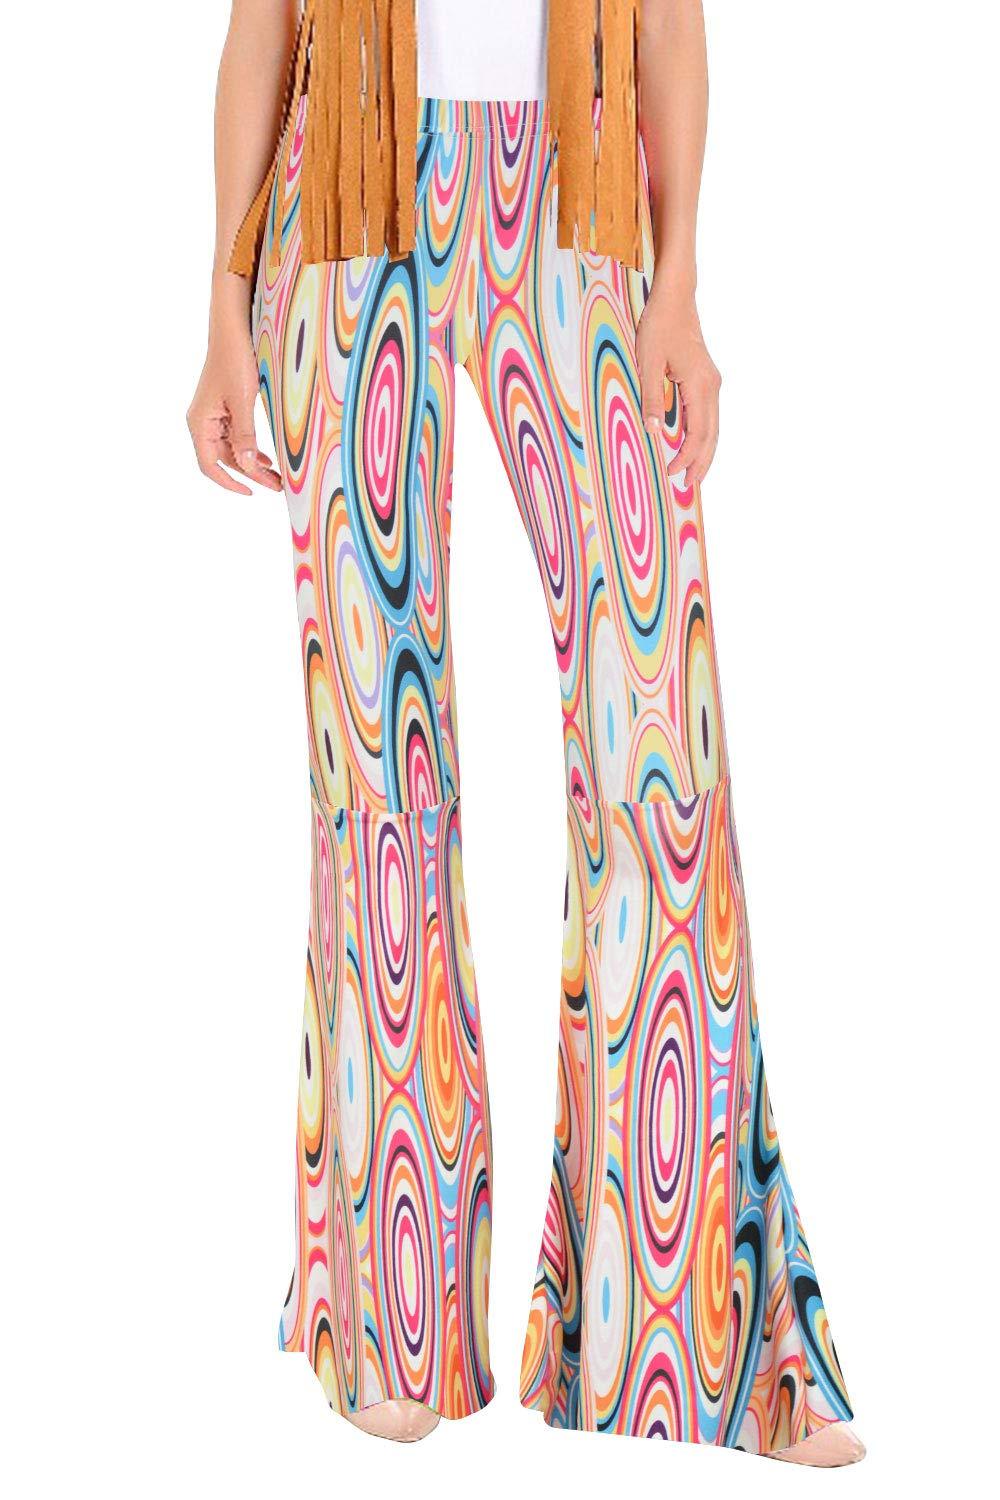 [Australia] - For G and PL Women's Hippie Costume Pants Floral Bell Bottom Large Circle 